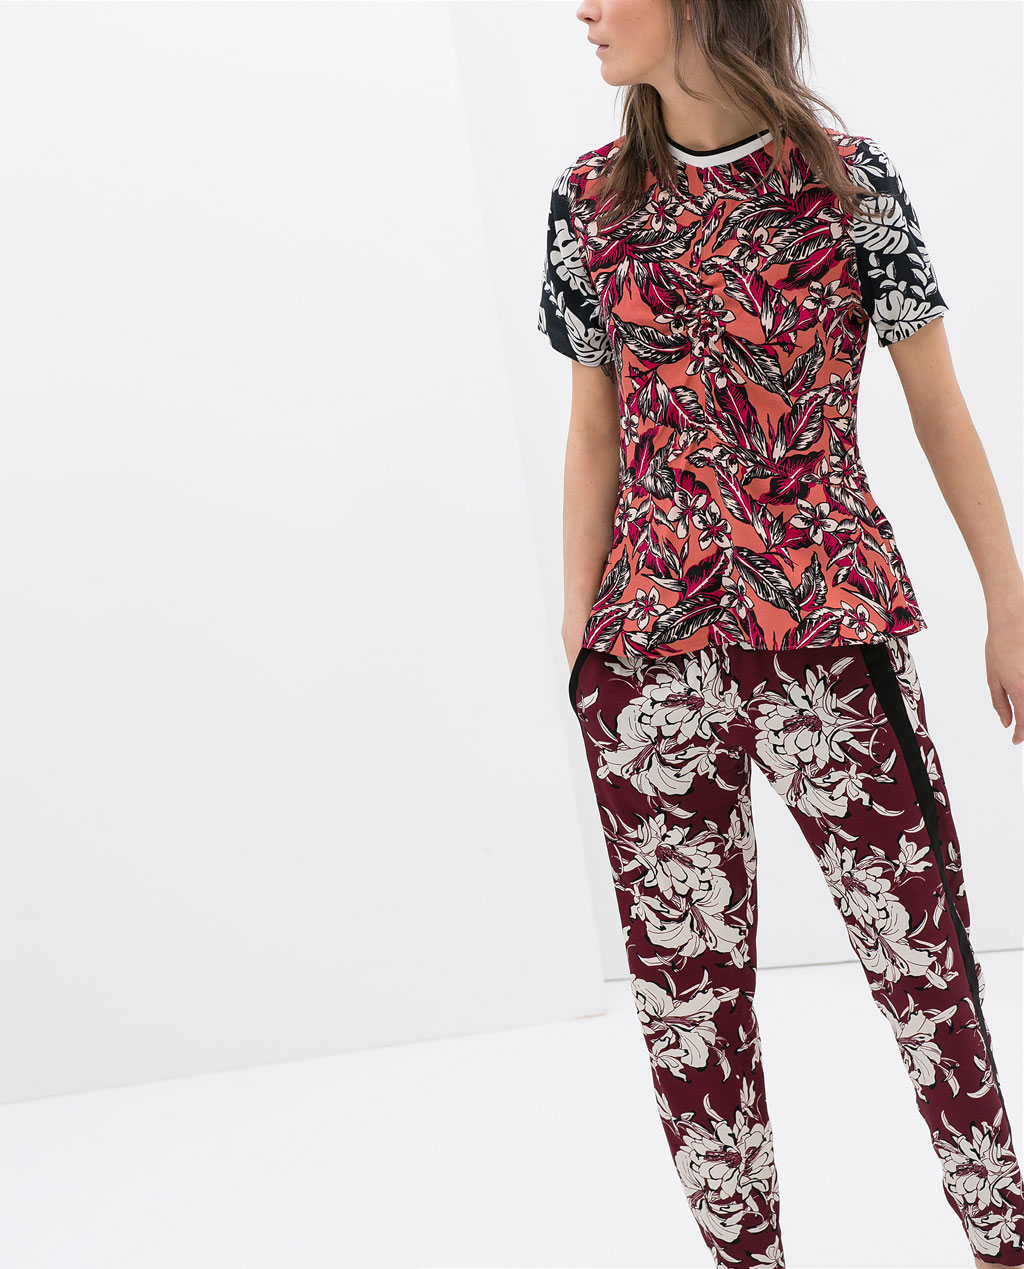 Zara: Bold Prints Perfect for Summer